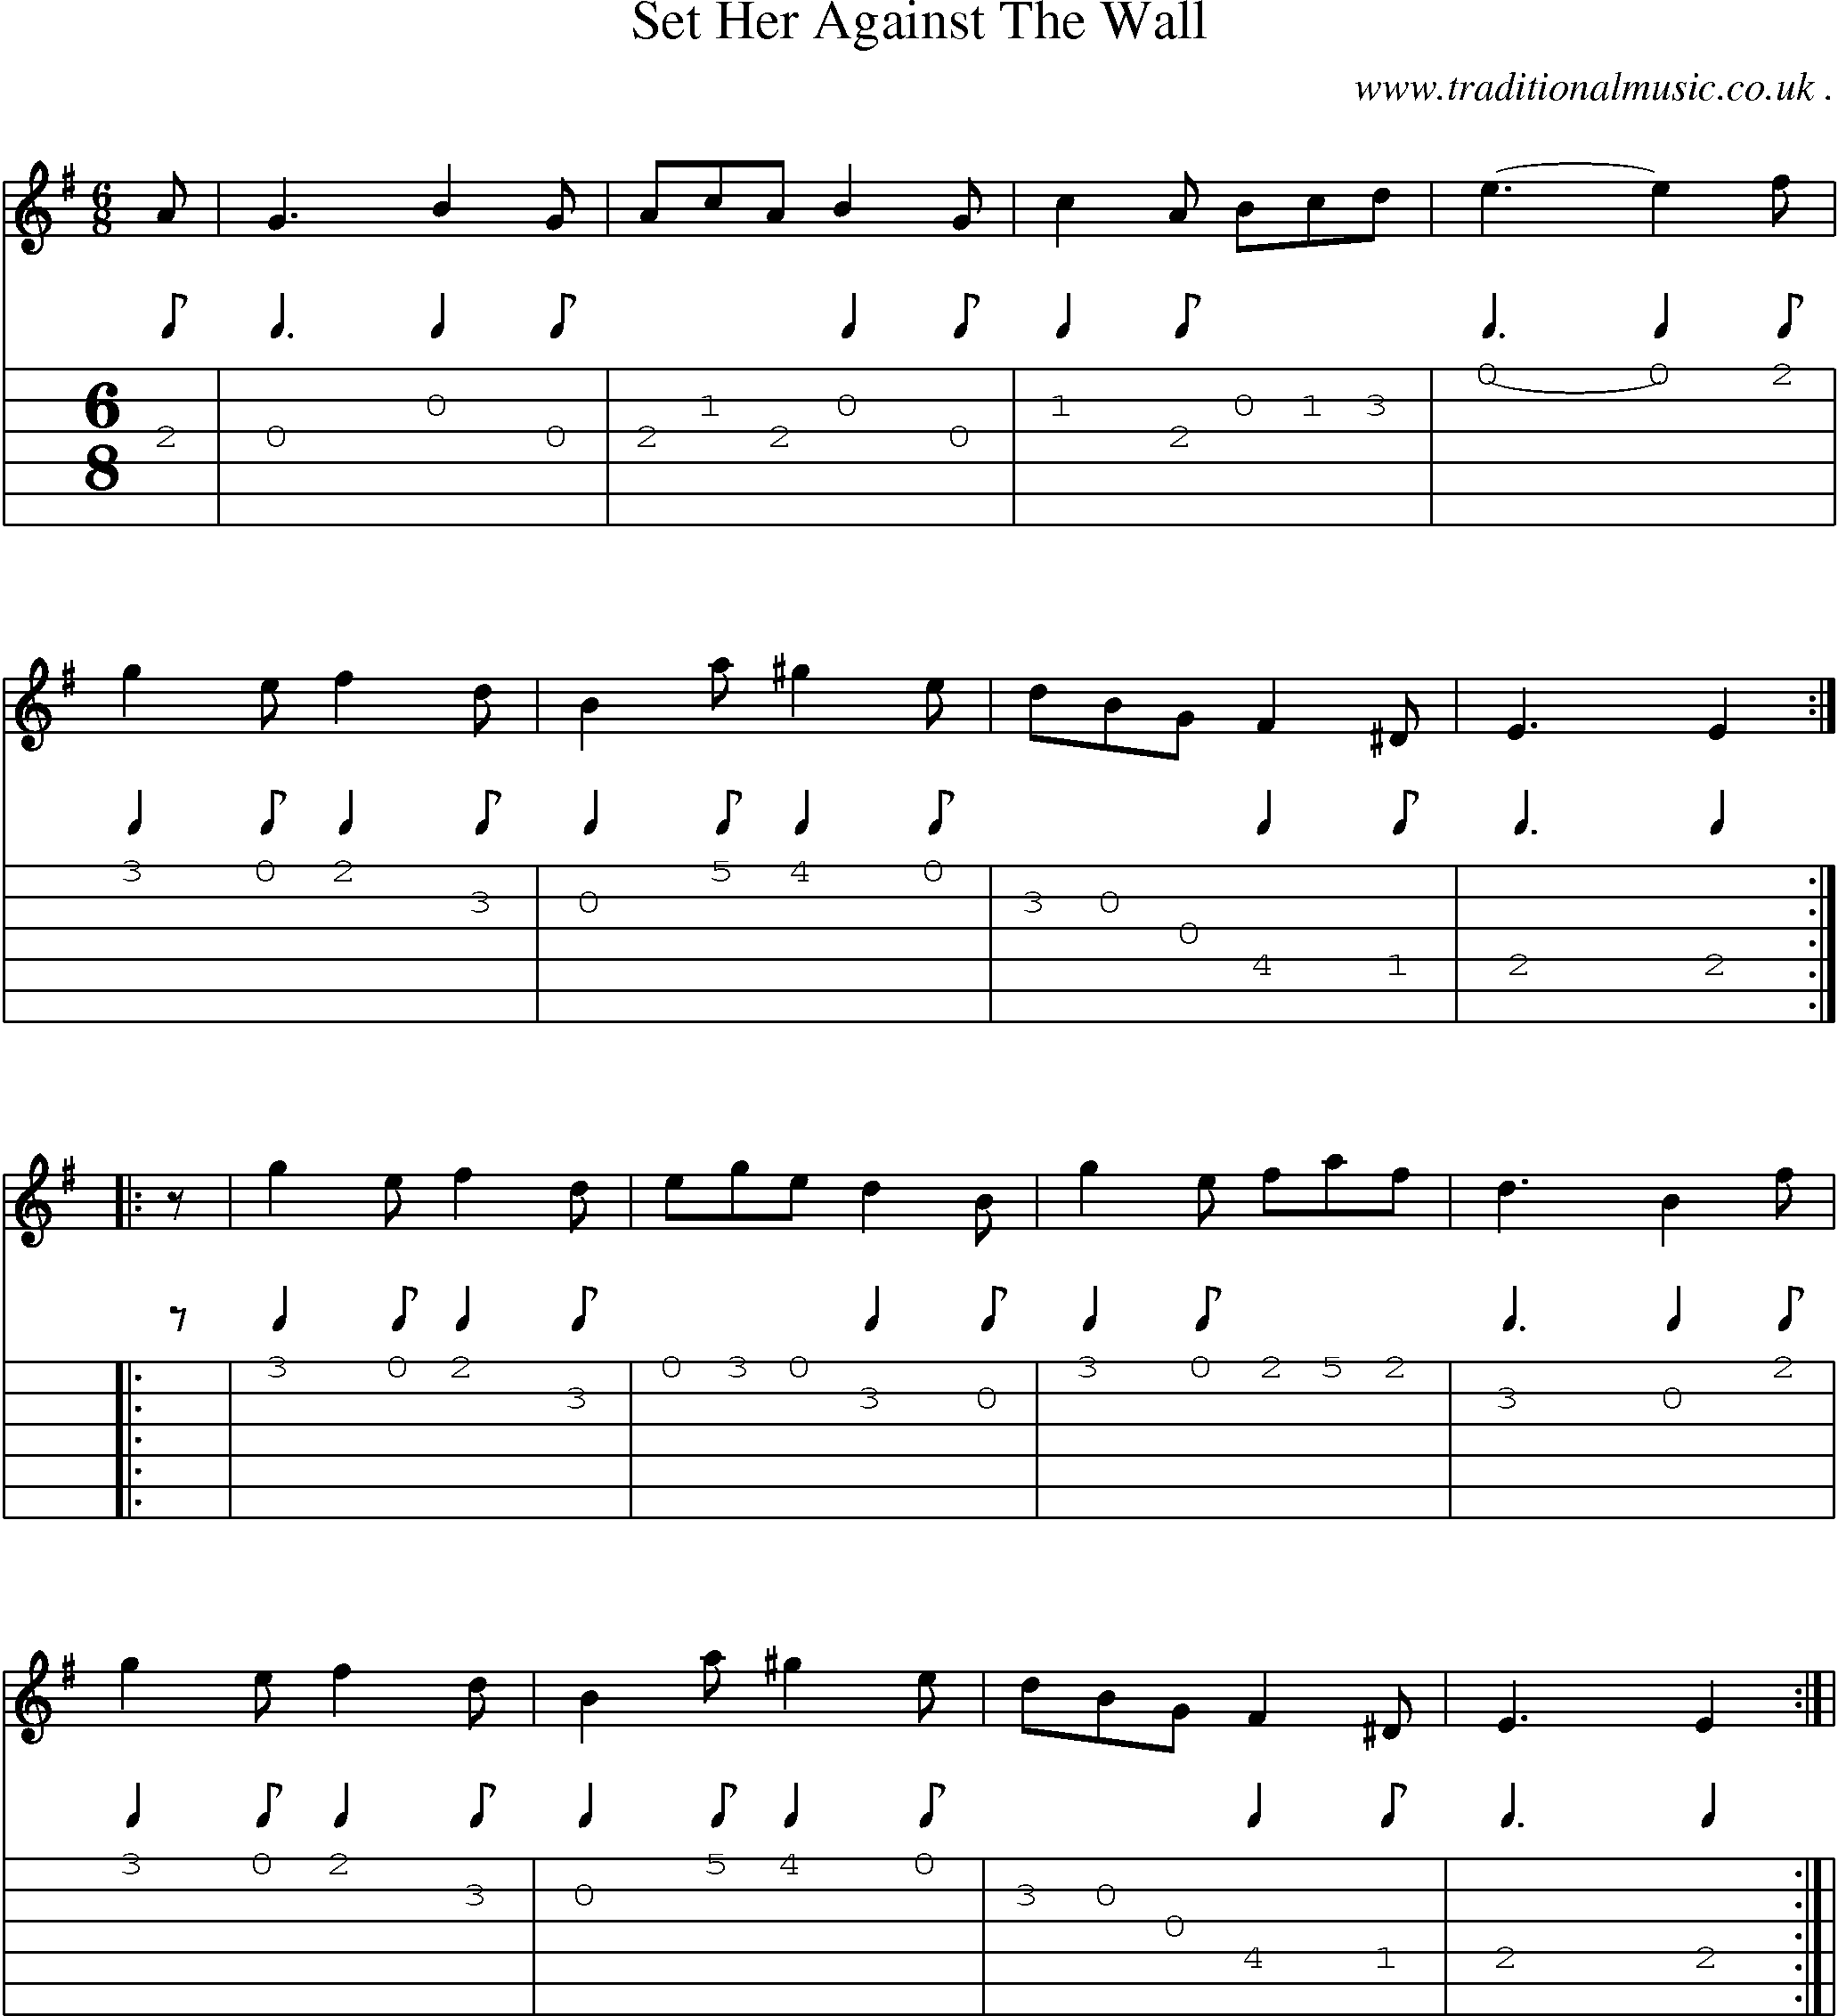 Sheet-Music and Guitar Tabs for Set Her Against The Wall